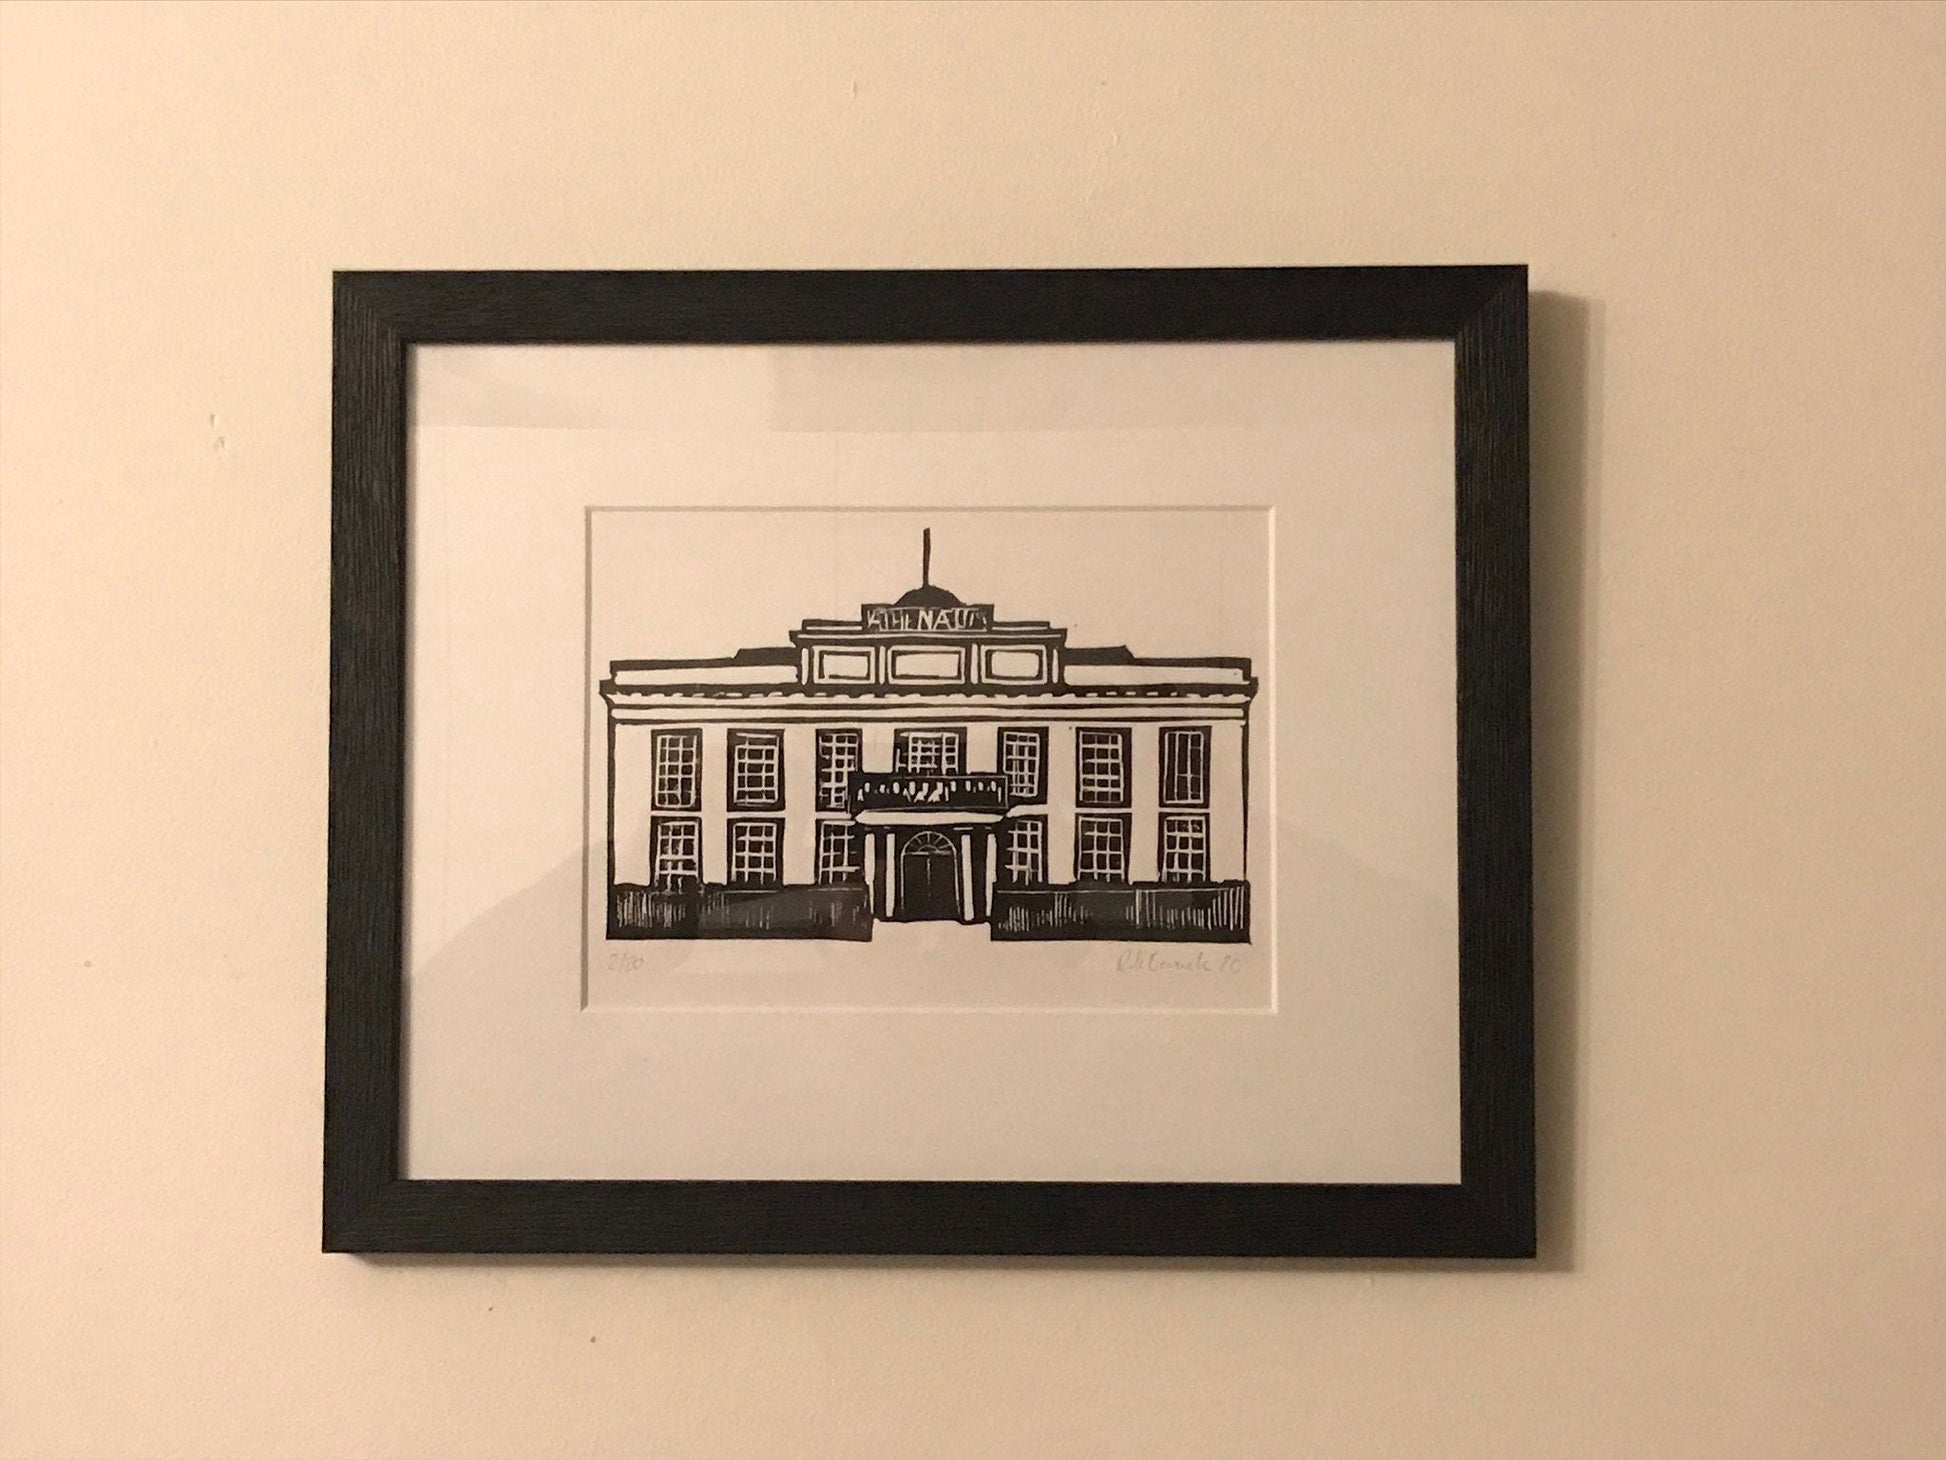 The Angel Hill Collection - Lino Prints of The Angel Hill Buildings Bury St Edmunds by The Rik Barwick Studio